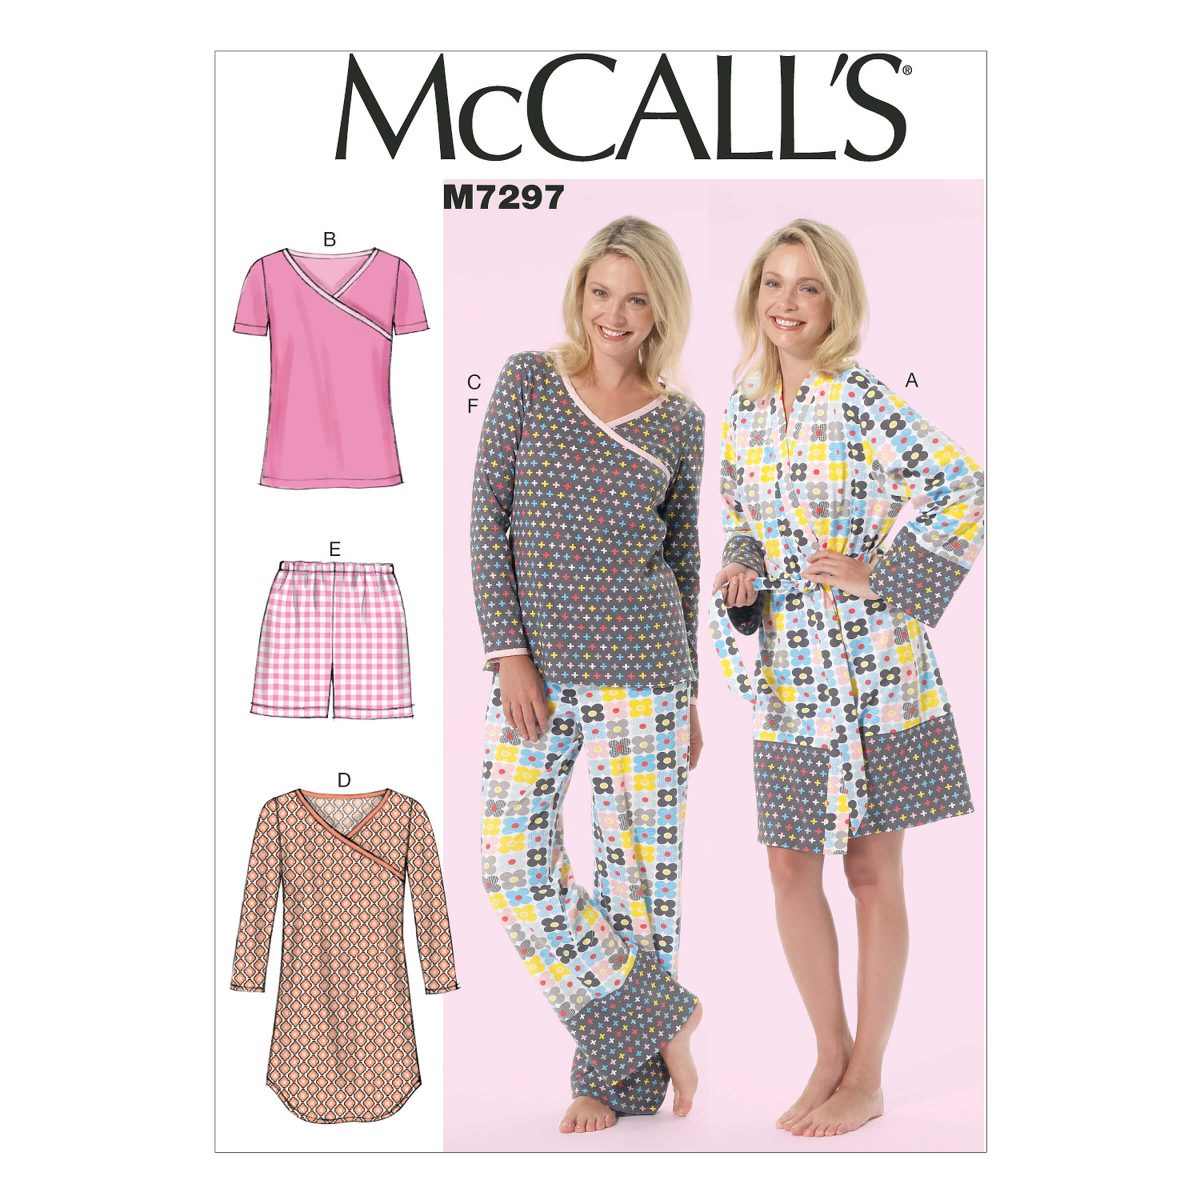 McCall's Sewing Pattern M7297 Misses'/Women's Robe, Belt, Tops, Dress, Shorts and Pants